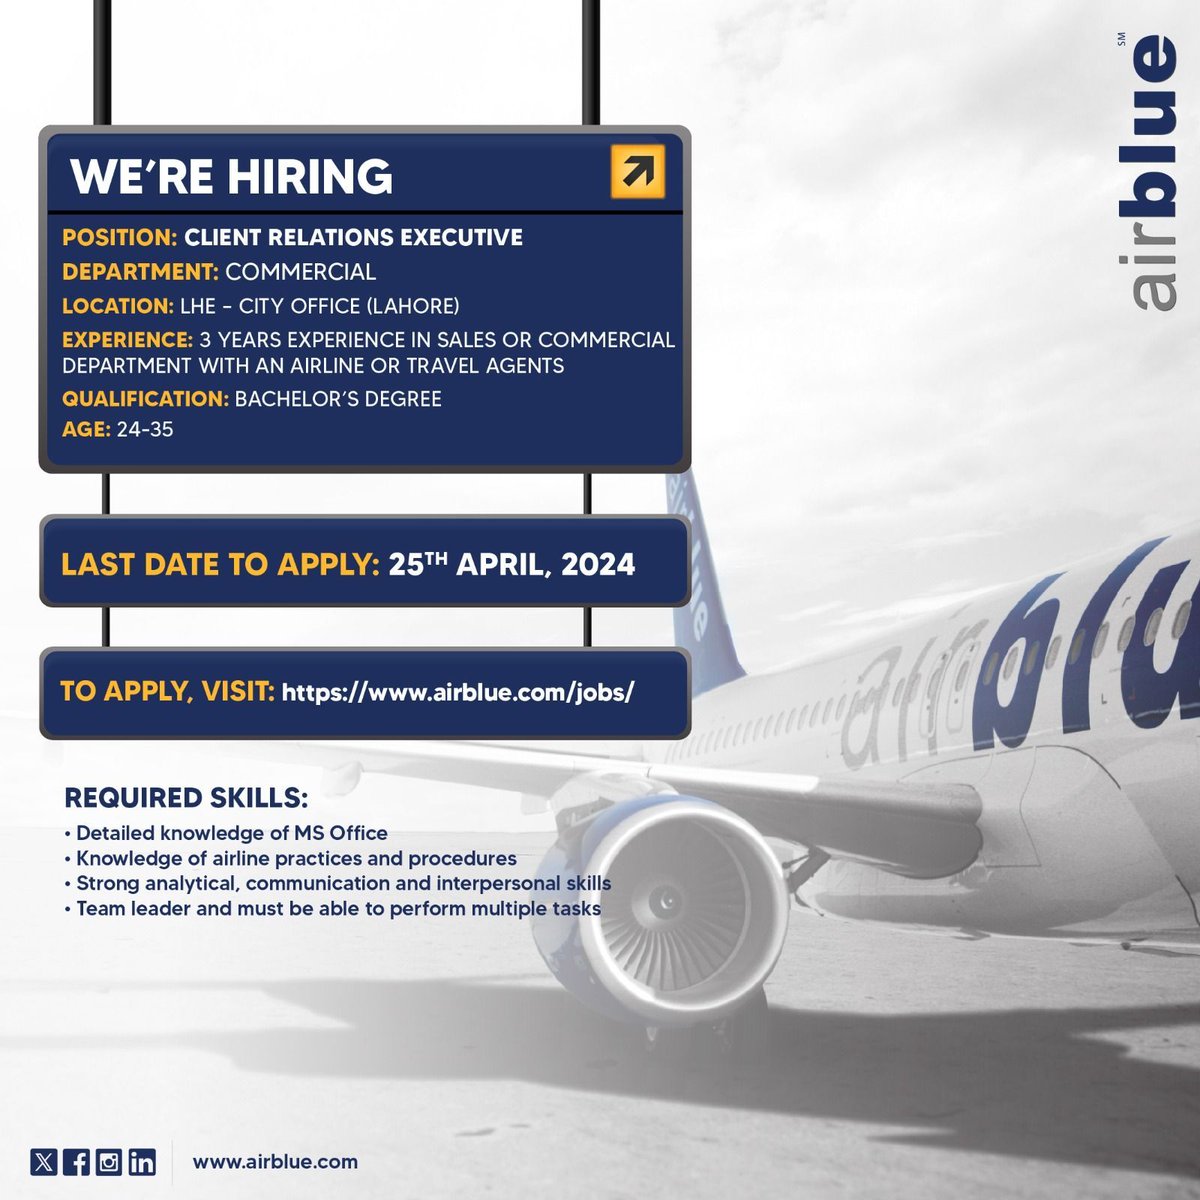 This is your chance to join our team. Position: Client Relations Executive Location: Lahore Deadline: 25th April 2024 To apply, visit: airblue.com/jobs/ #airblue #hiringalert #airbluejobs #hiringnow